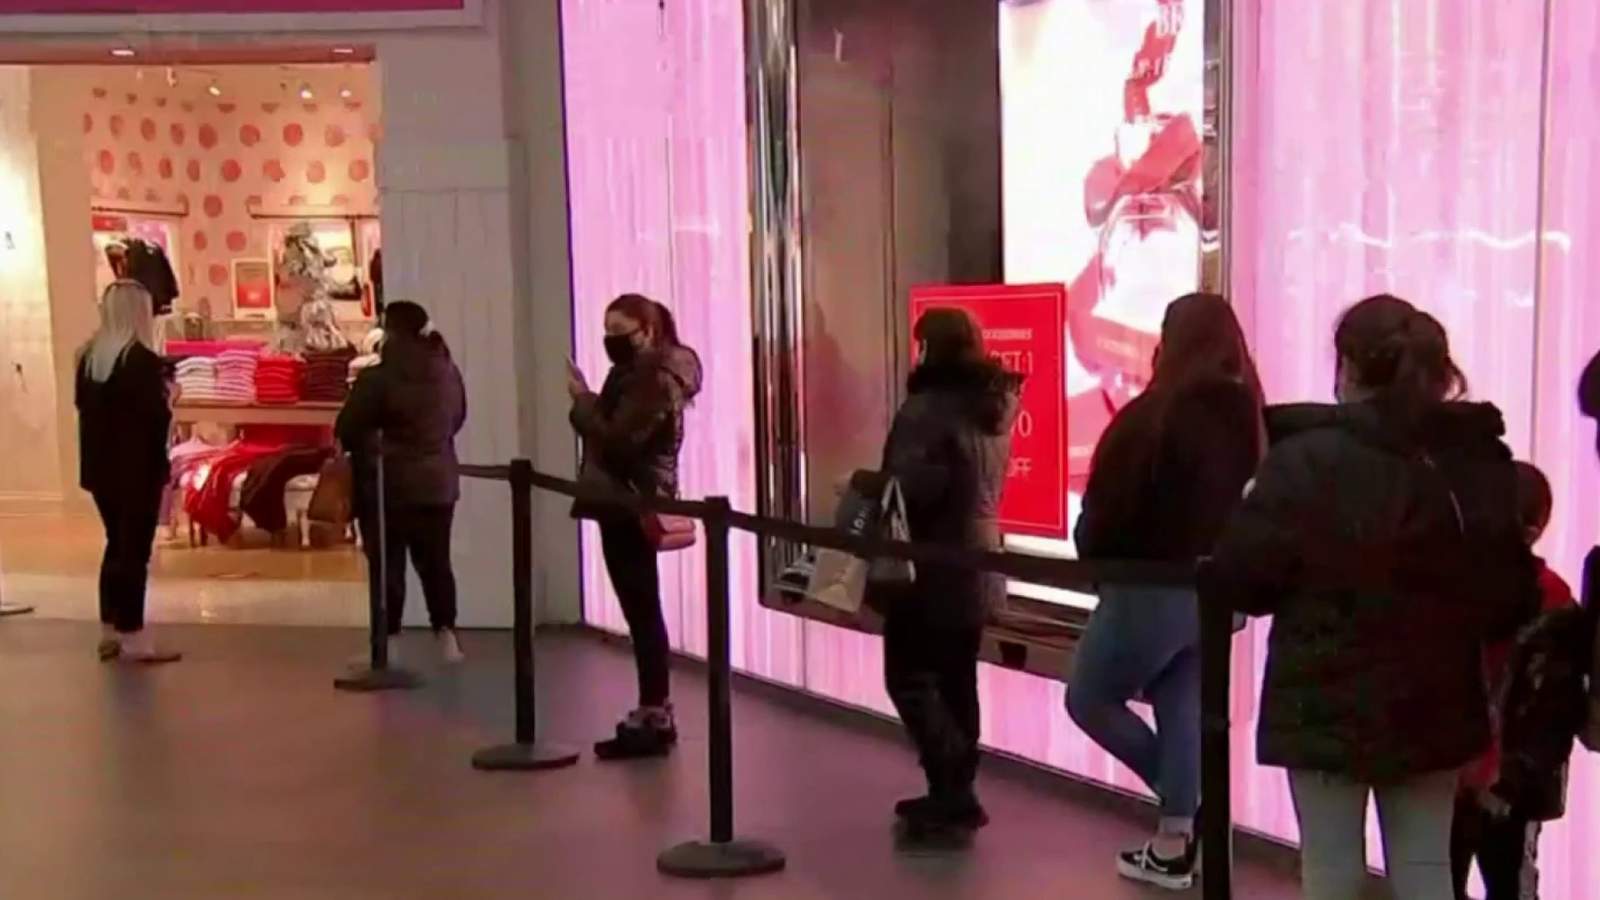 Black Friday holiday shopping in Metro Detroit toned down amid pandemic